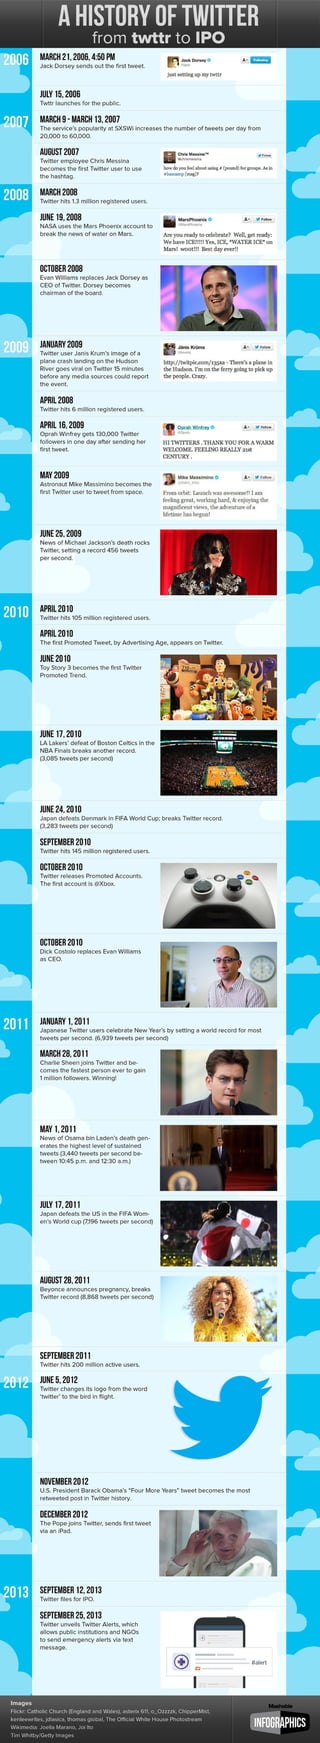 The History of Twitter, From Egg to IPO